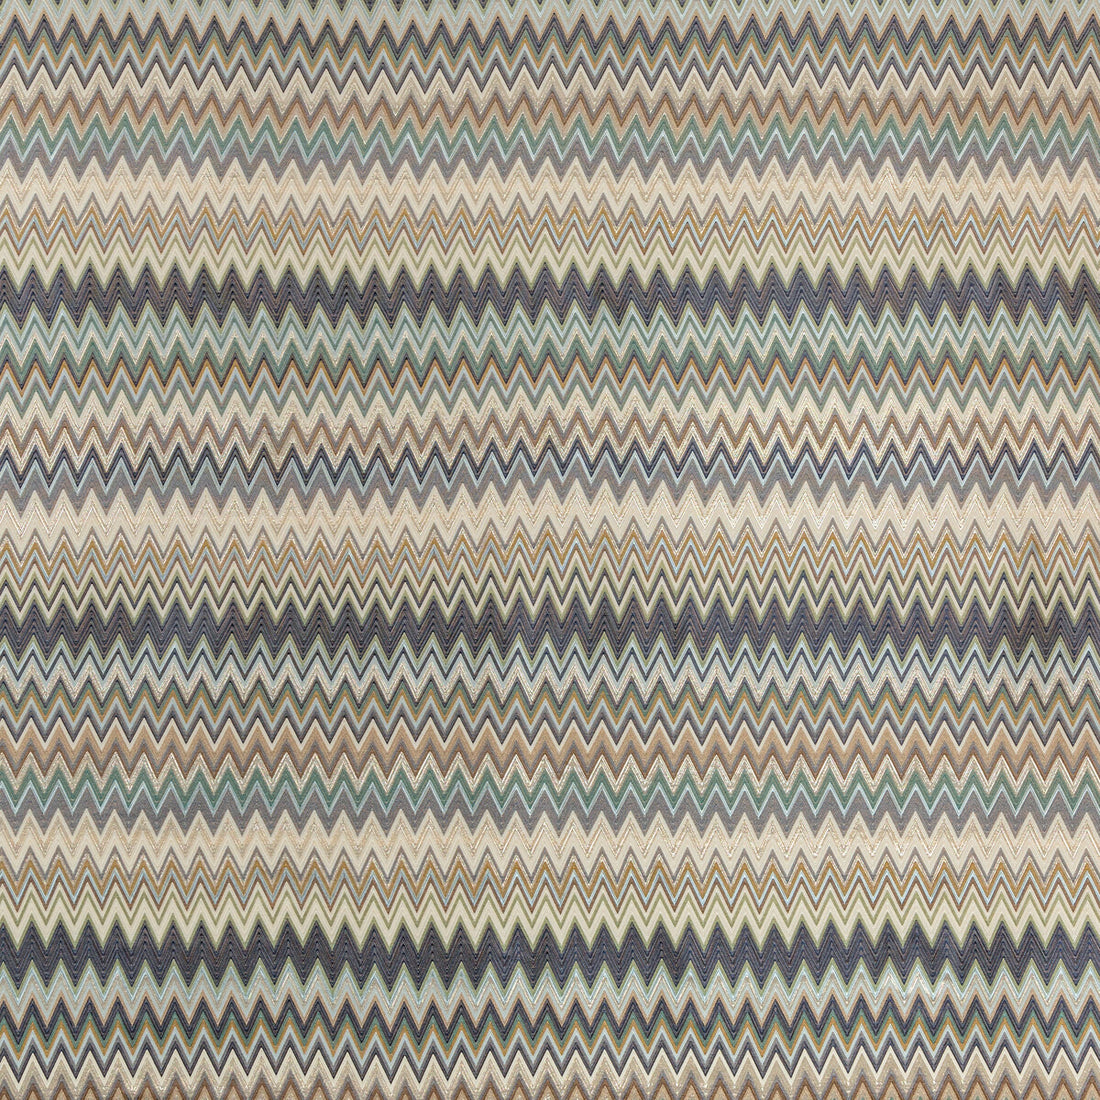 Masuleh fabric in 170 color - pattern 36168.1630.0 - by Kravet Couture in the Missoni Home collection